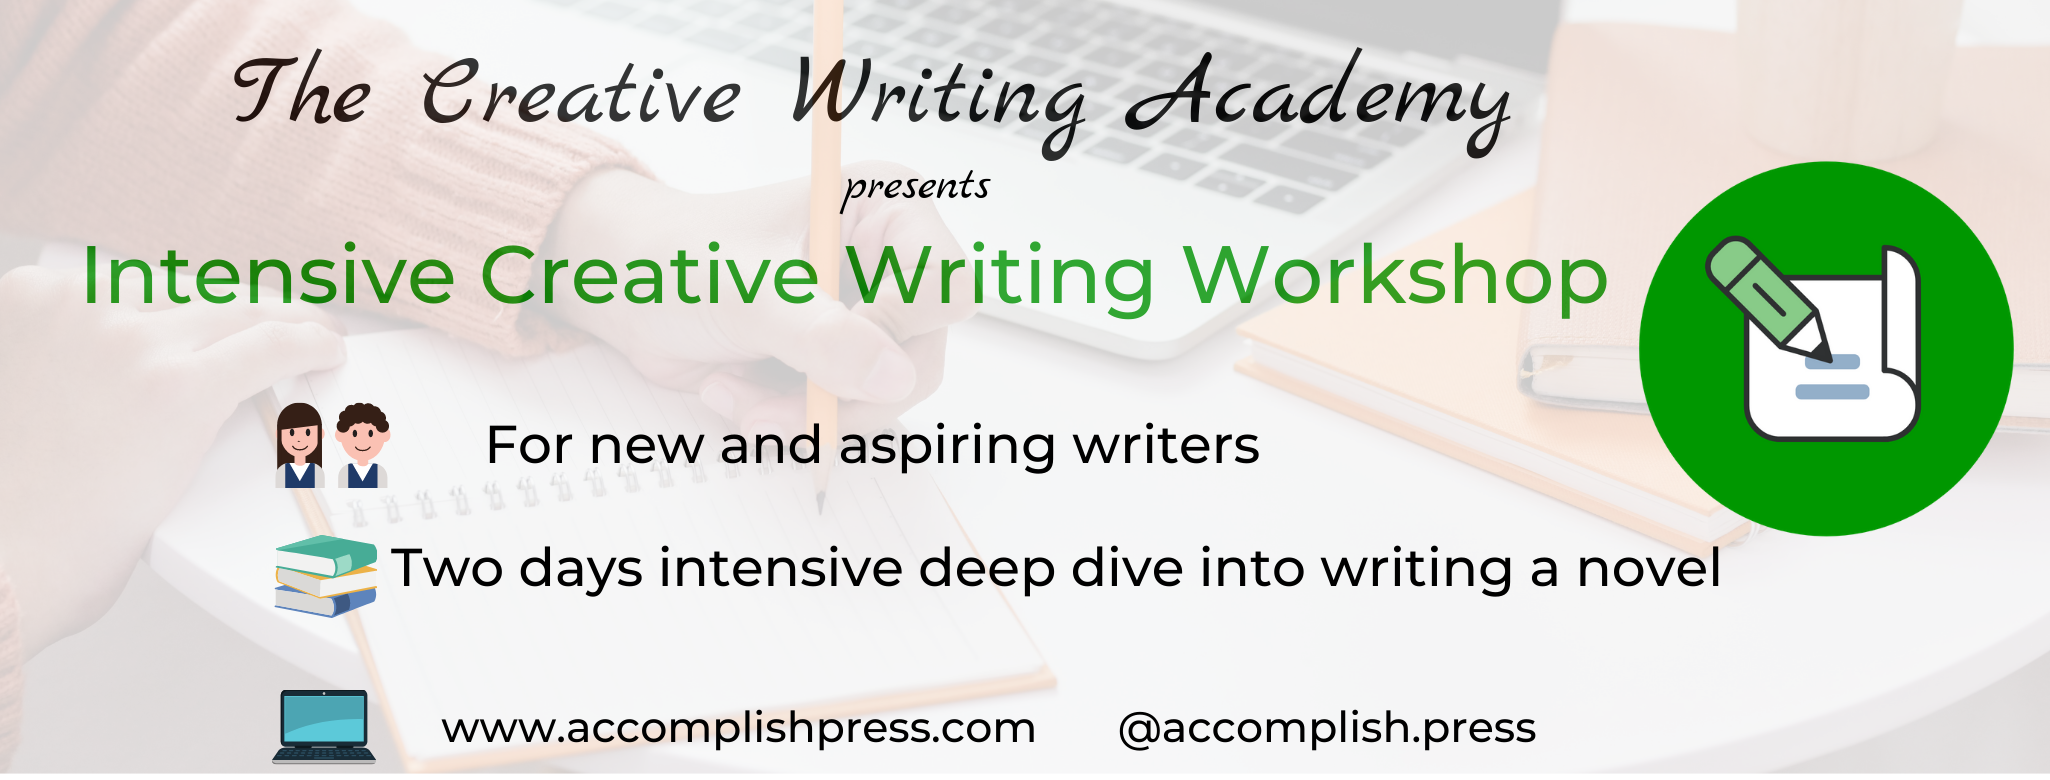 creative writing intensive 5 day workshop